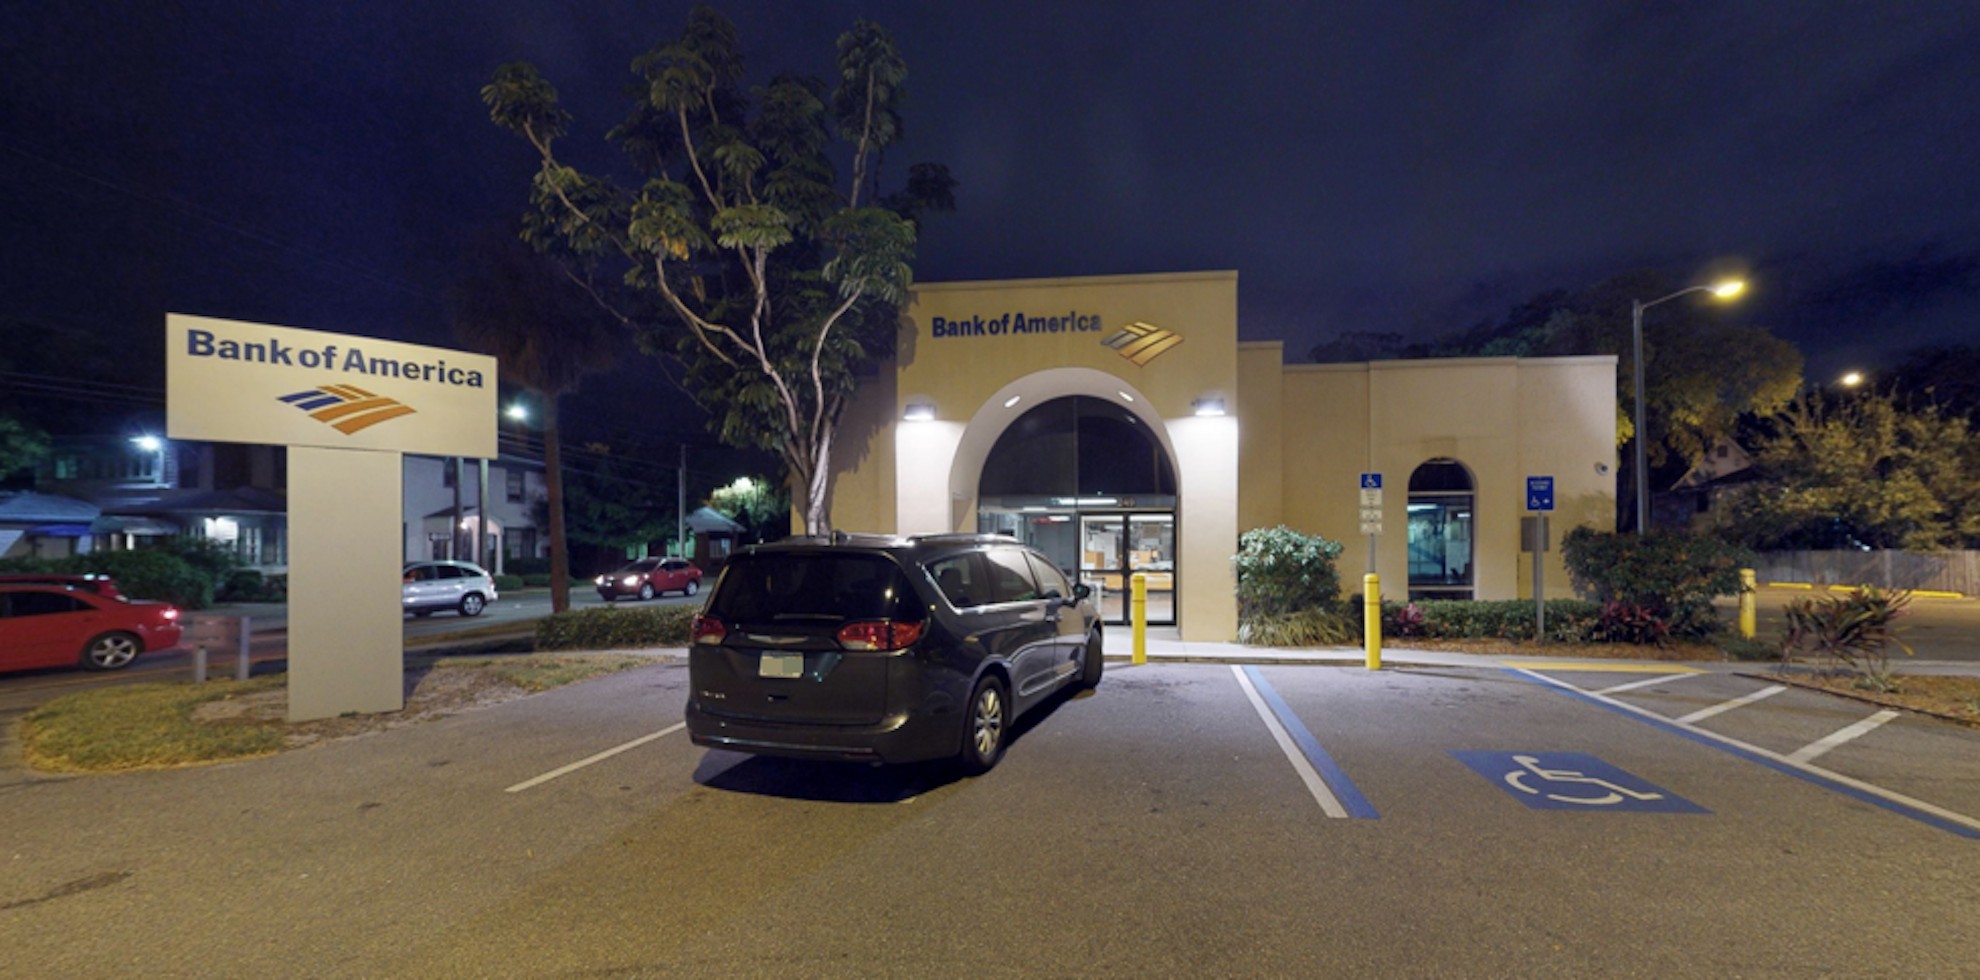 Bank of America financial center with drive-thru ATM | 249 S Hyde Park Ave, Tampa, FL 33606